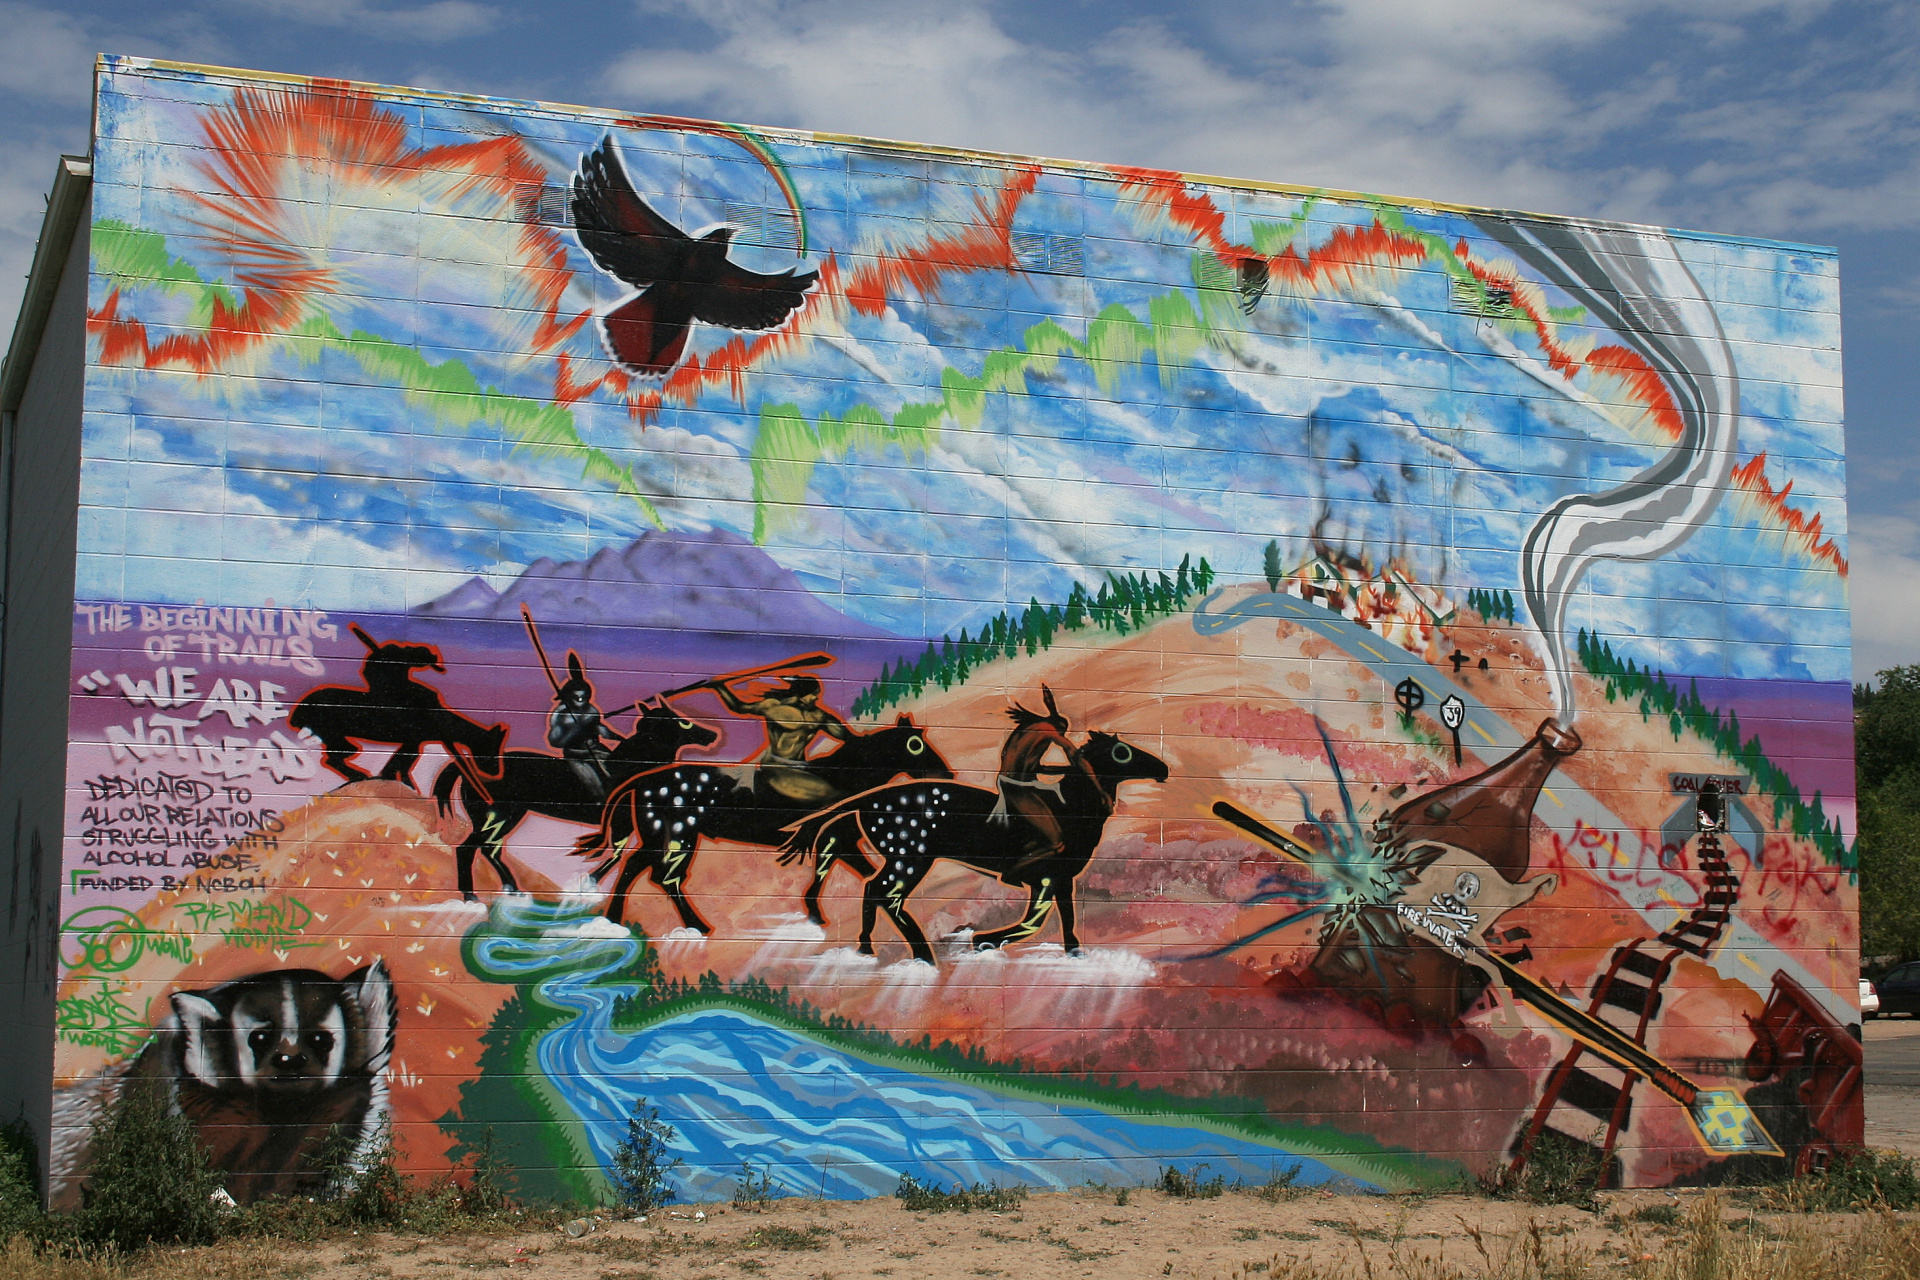 "The Beginning of Trails" Graffiti (Travels » US Trip 1: Cheyenne Country » The Rez » Lame Deer)